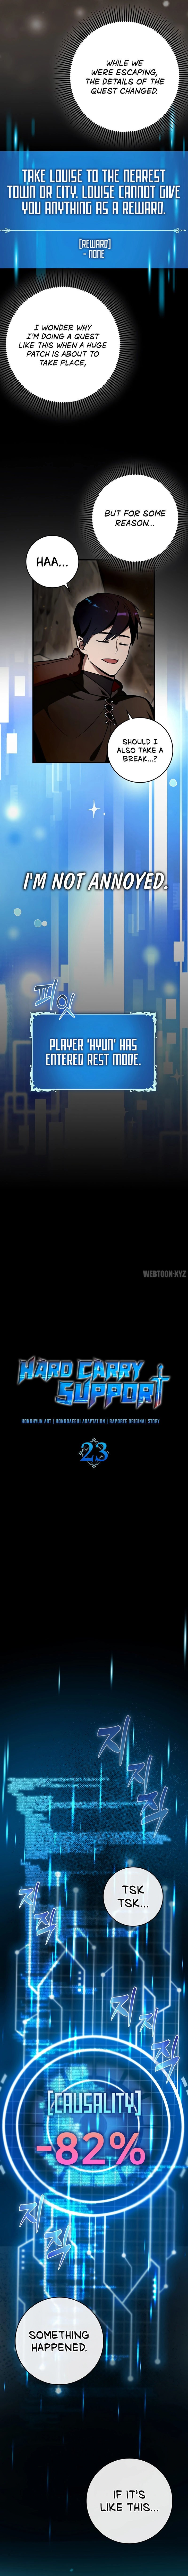 hard-carry-support-chap-23-2